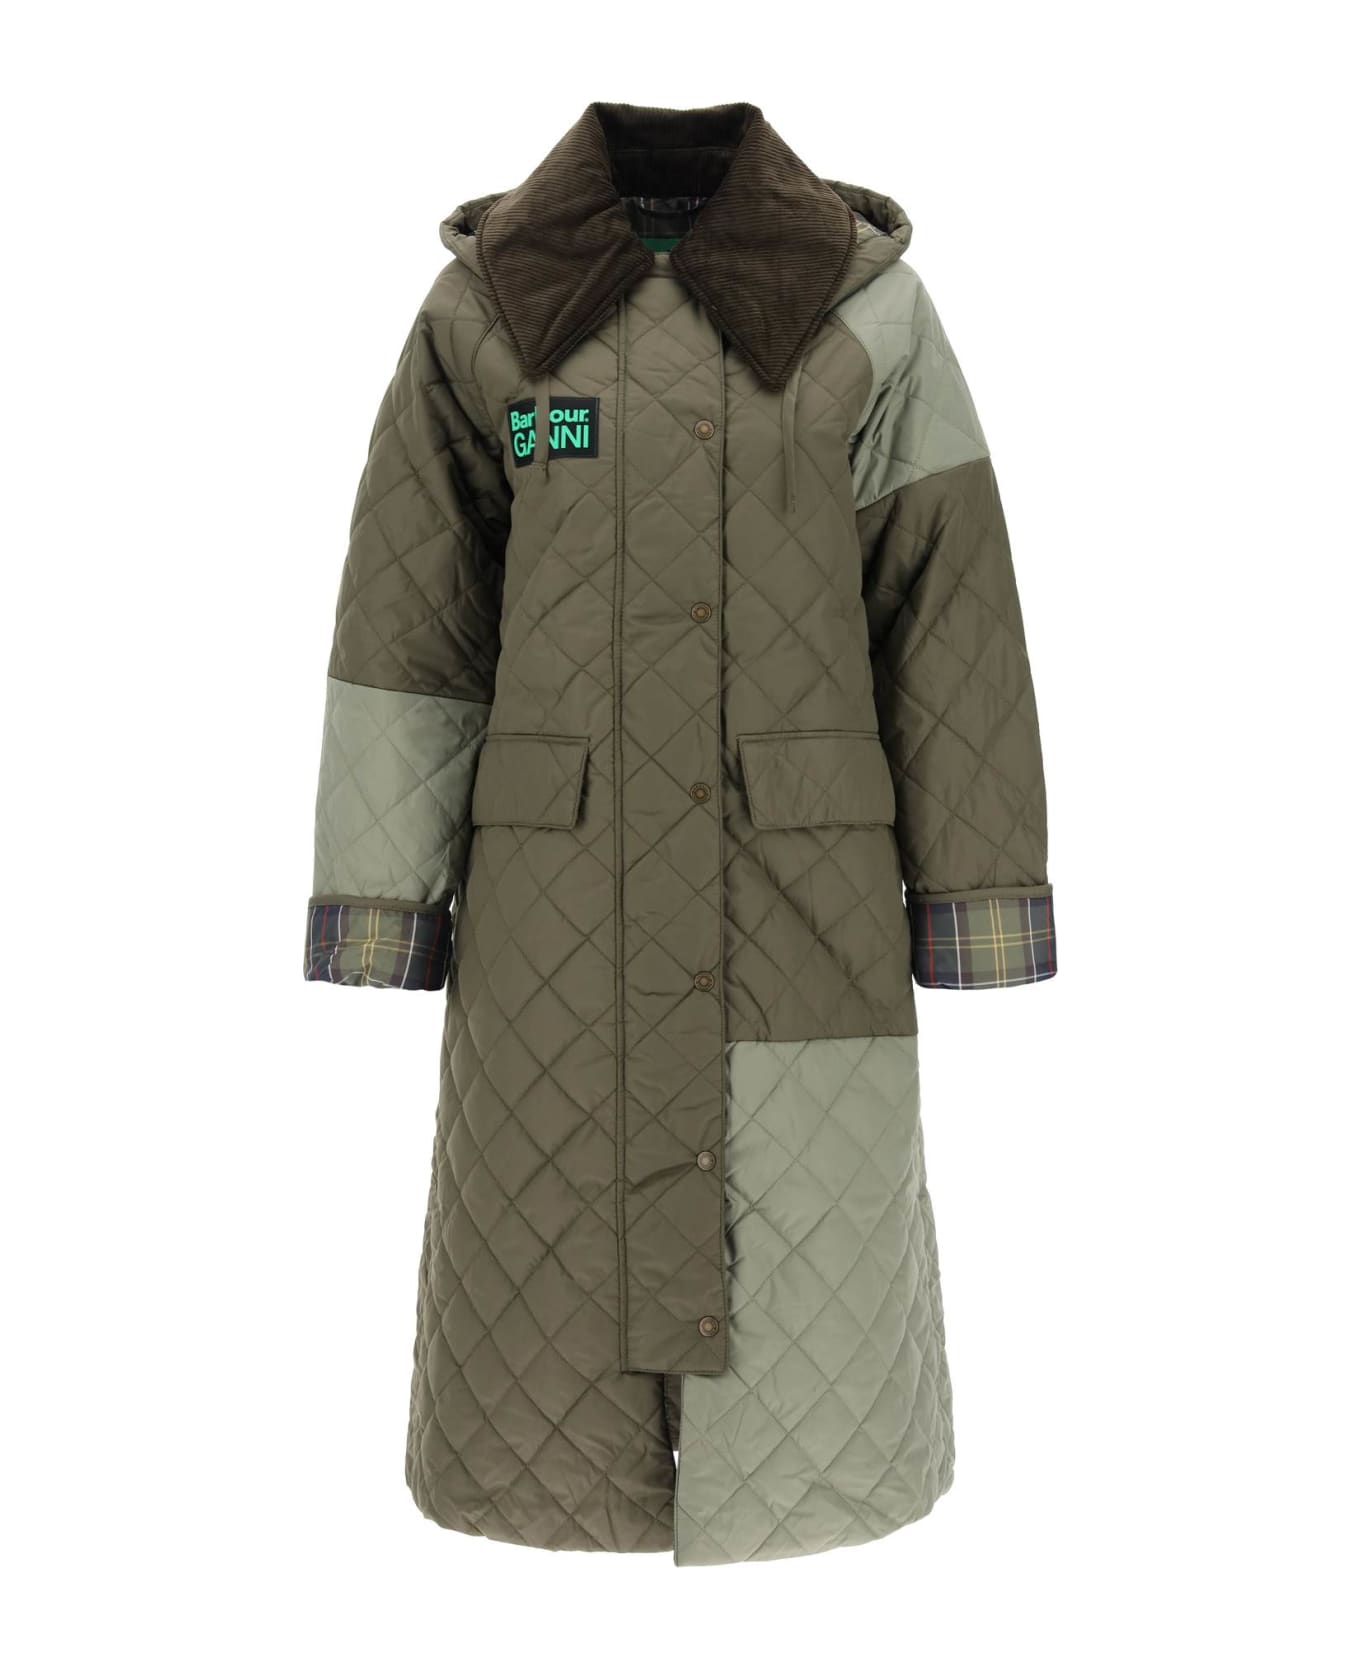 Barbour 'quilted Burghley' Long Down Jacket - FERN LT MOSS CLASSIC (Green) ジャケット